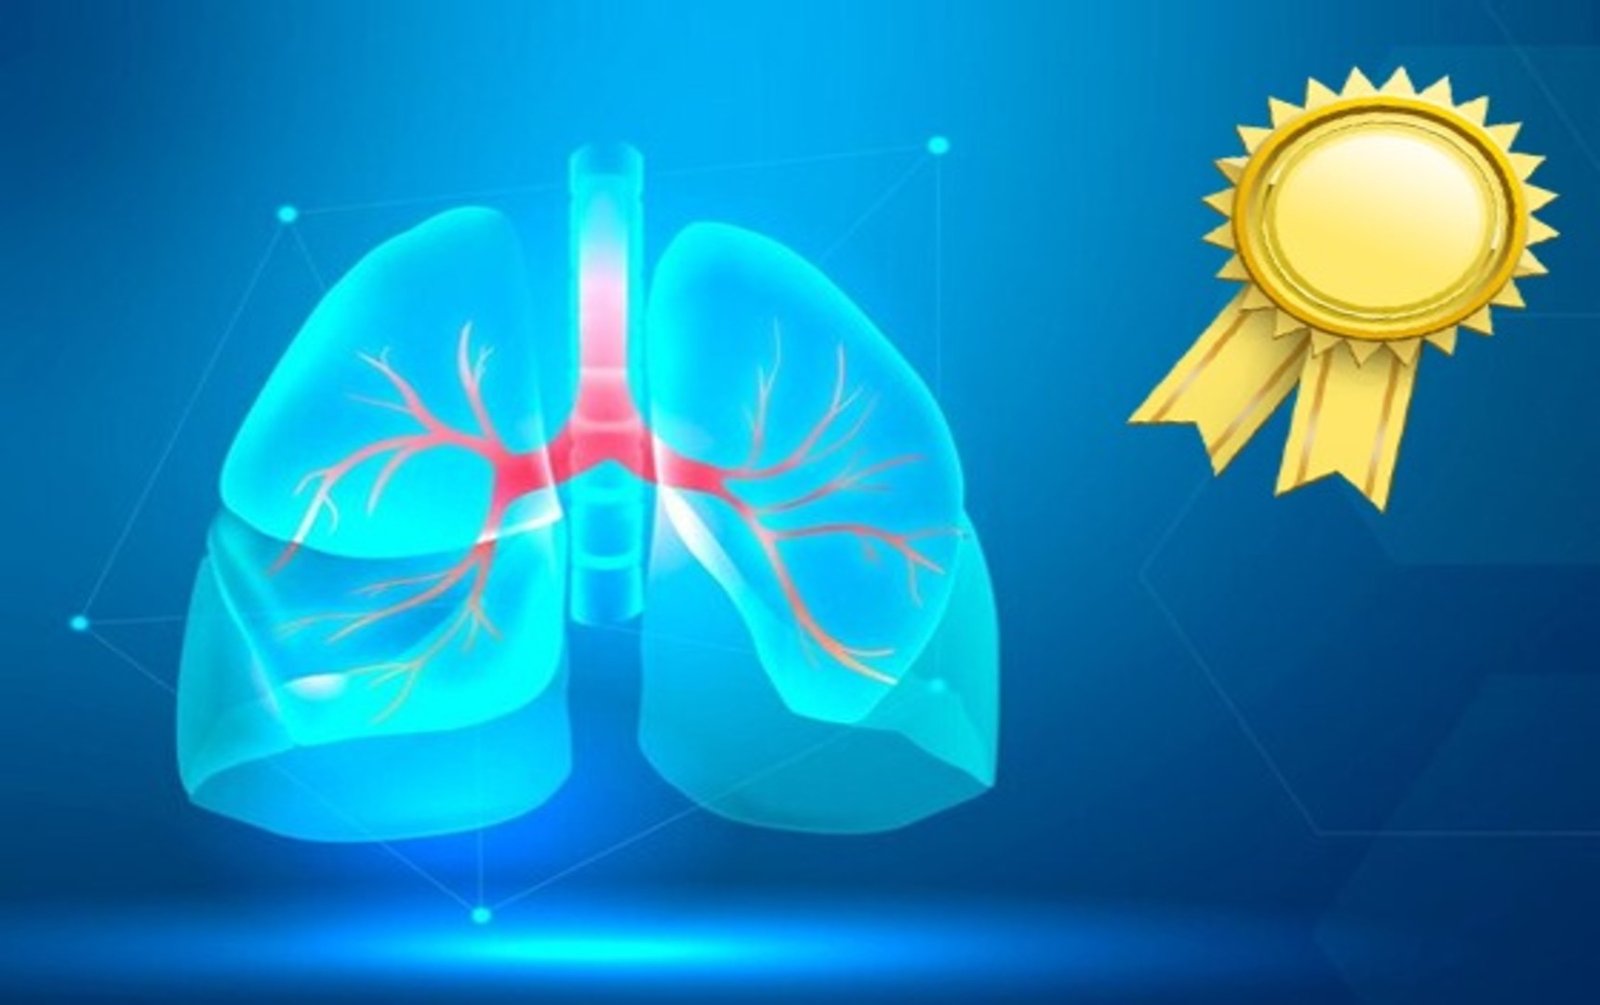 tuberculosis prevention activities; National award for Kerala